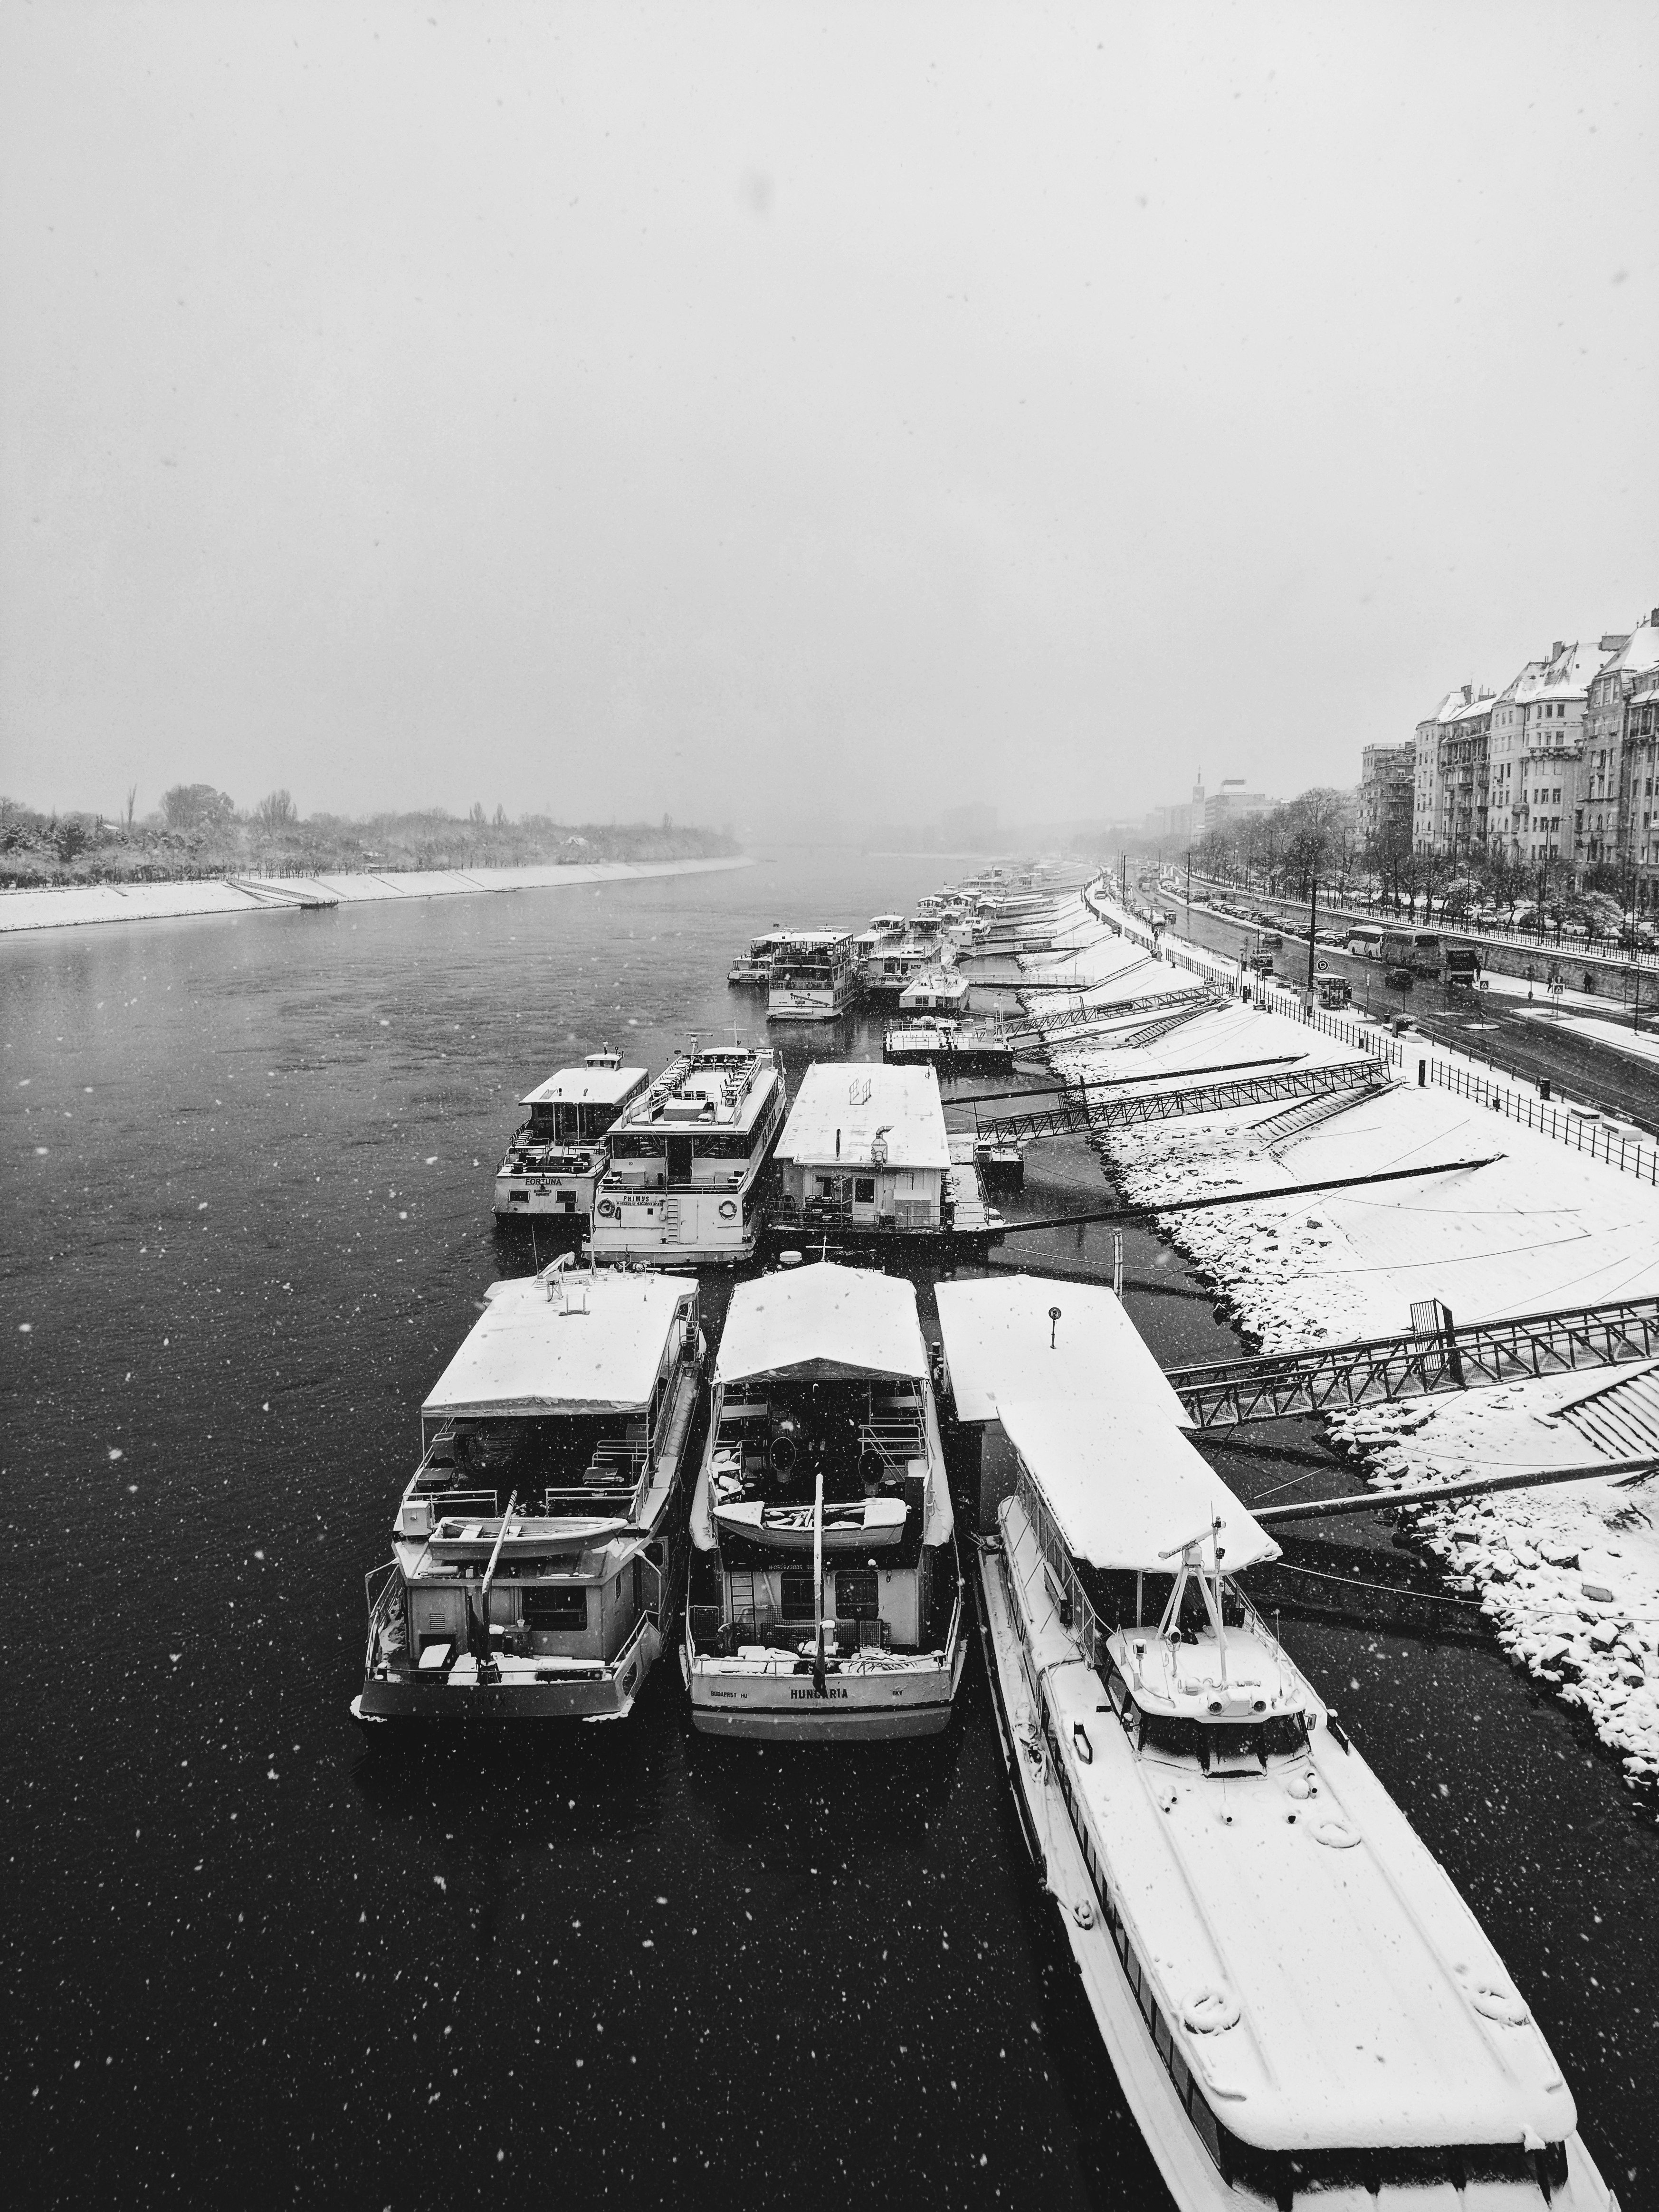 grayscale photography of boats on body of water